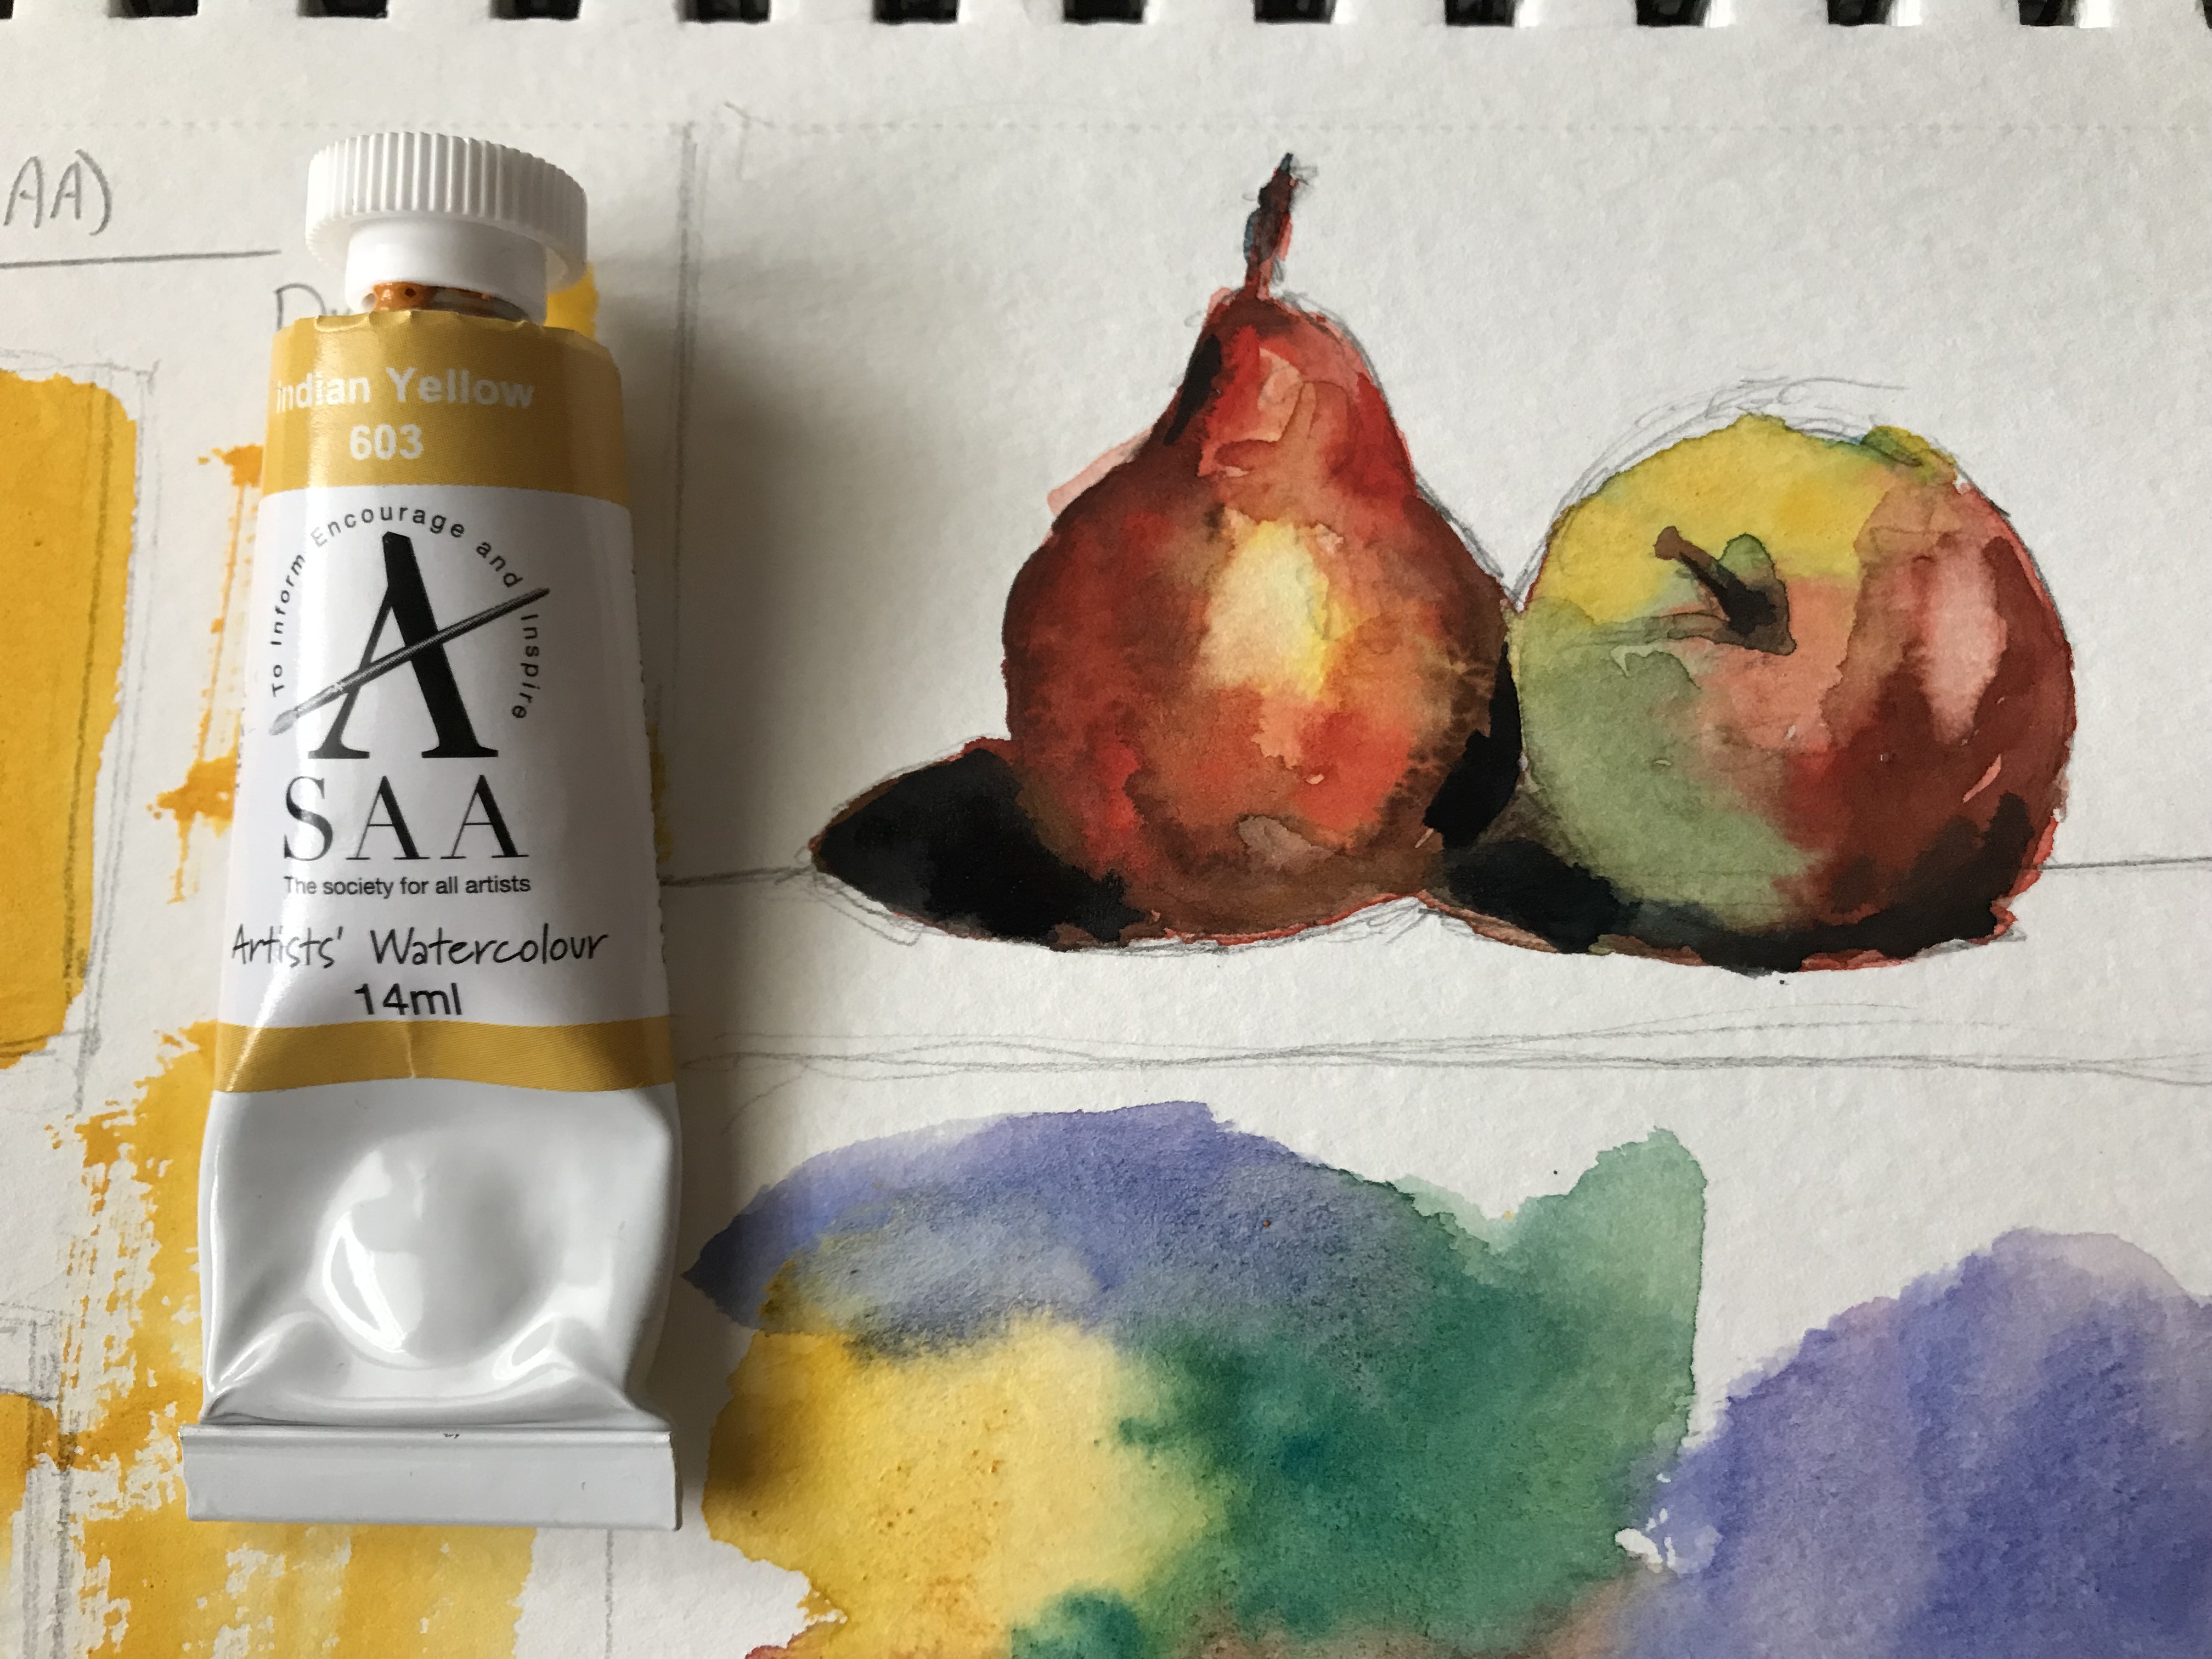 A still-life of a pear and apple, done with Indian Yellow